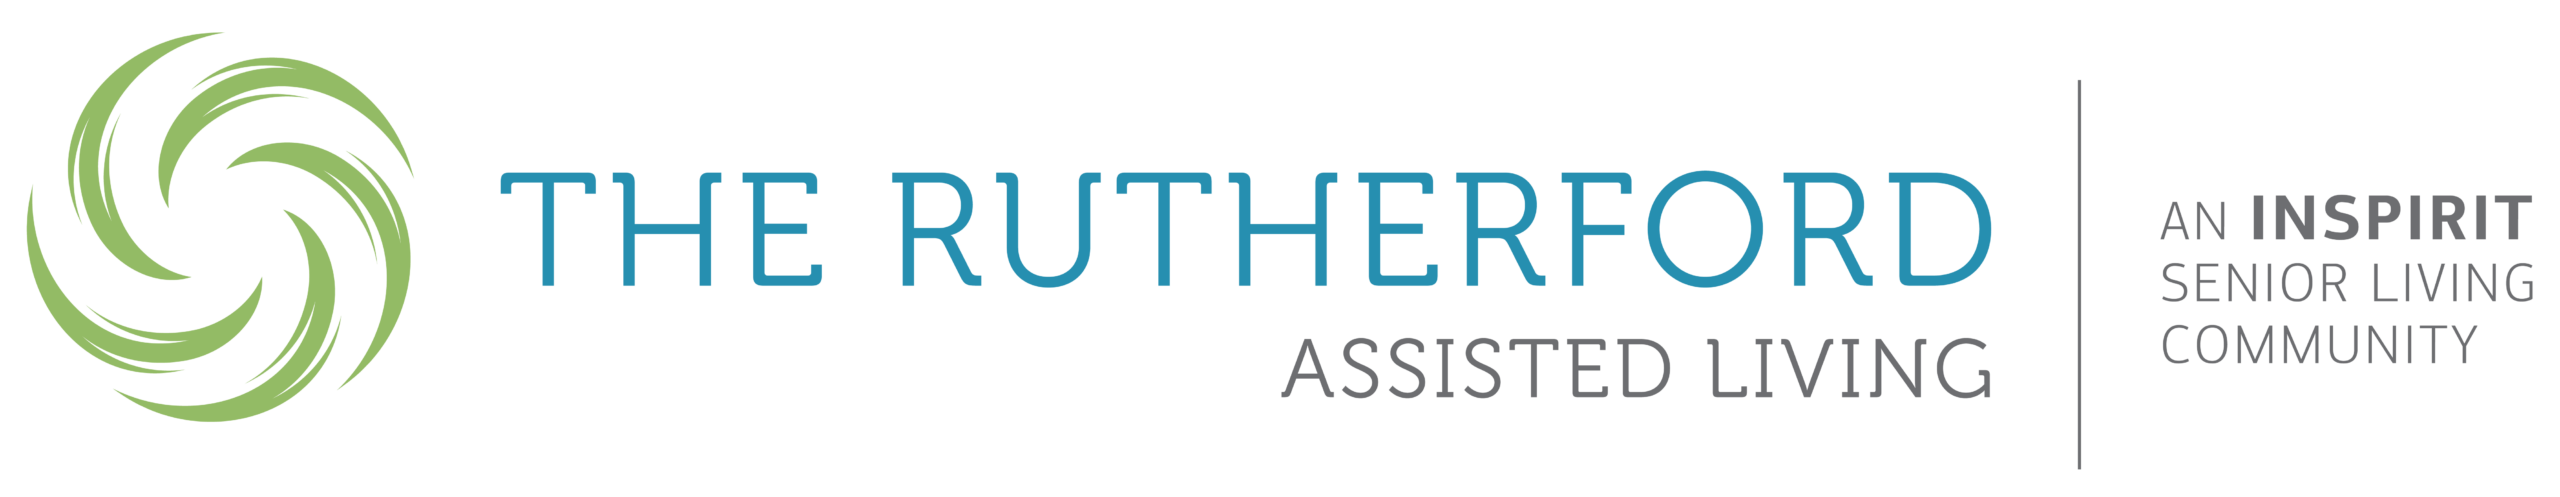 The Rutherford Assisted Living logo